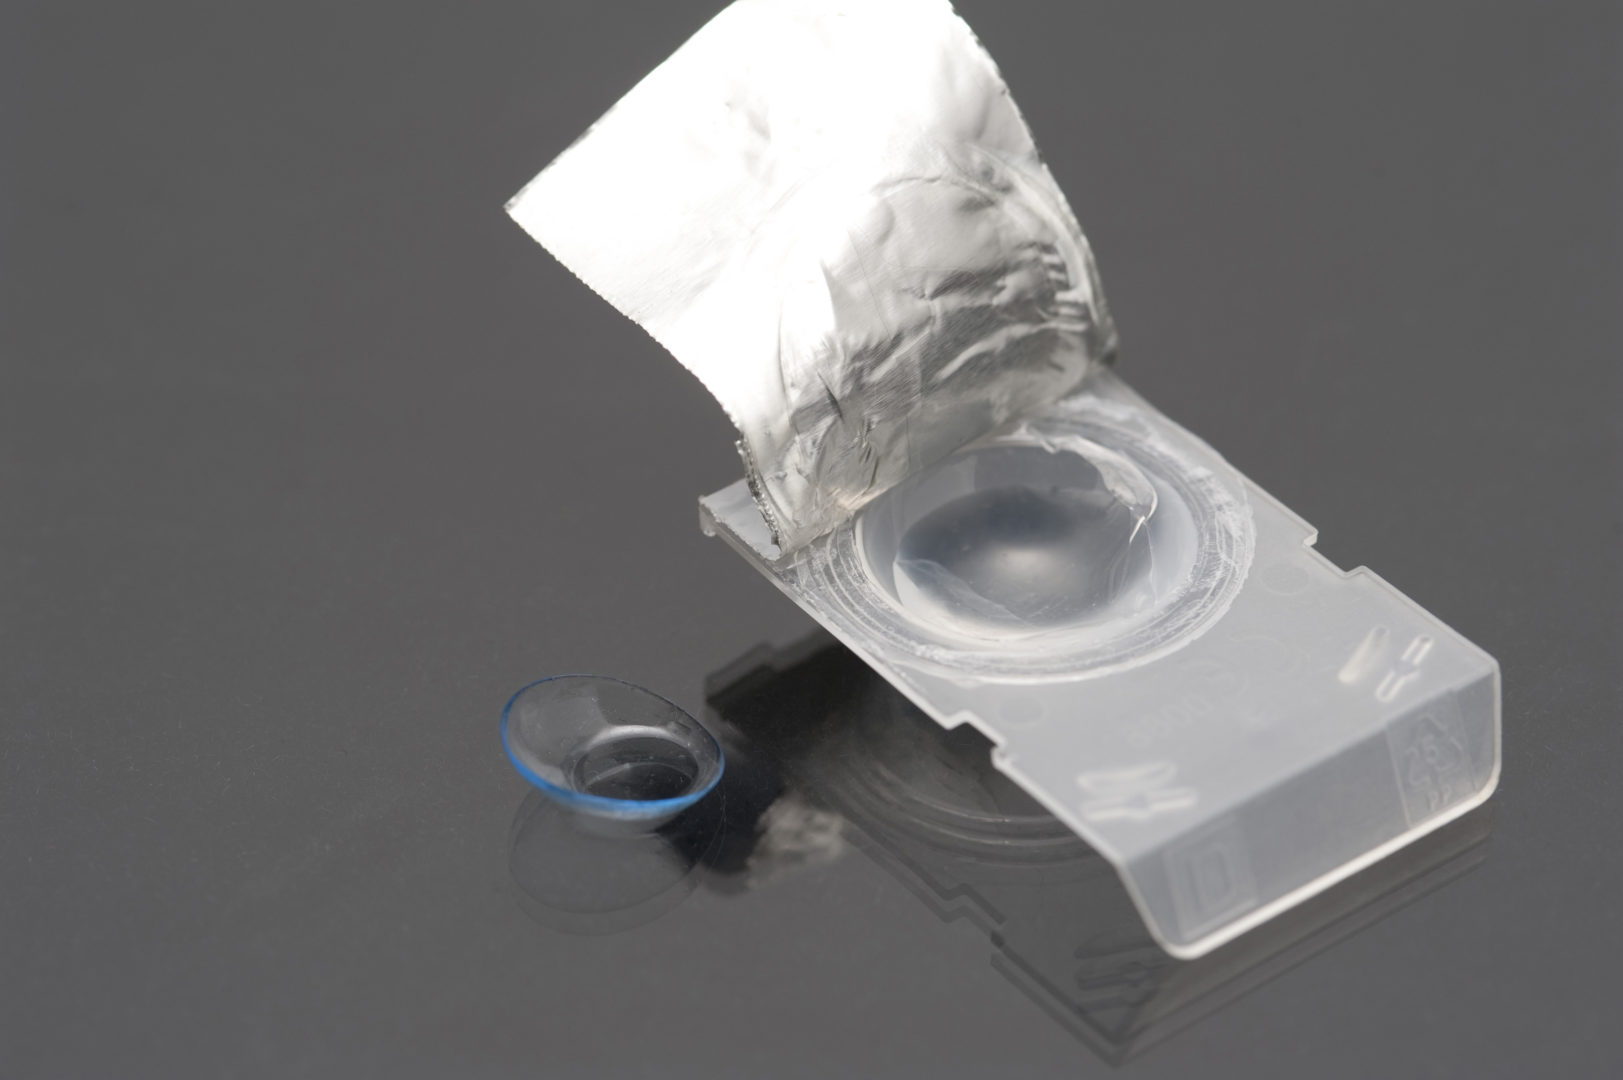 Contact lens and packaging recycling with Bausch & Lomb